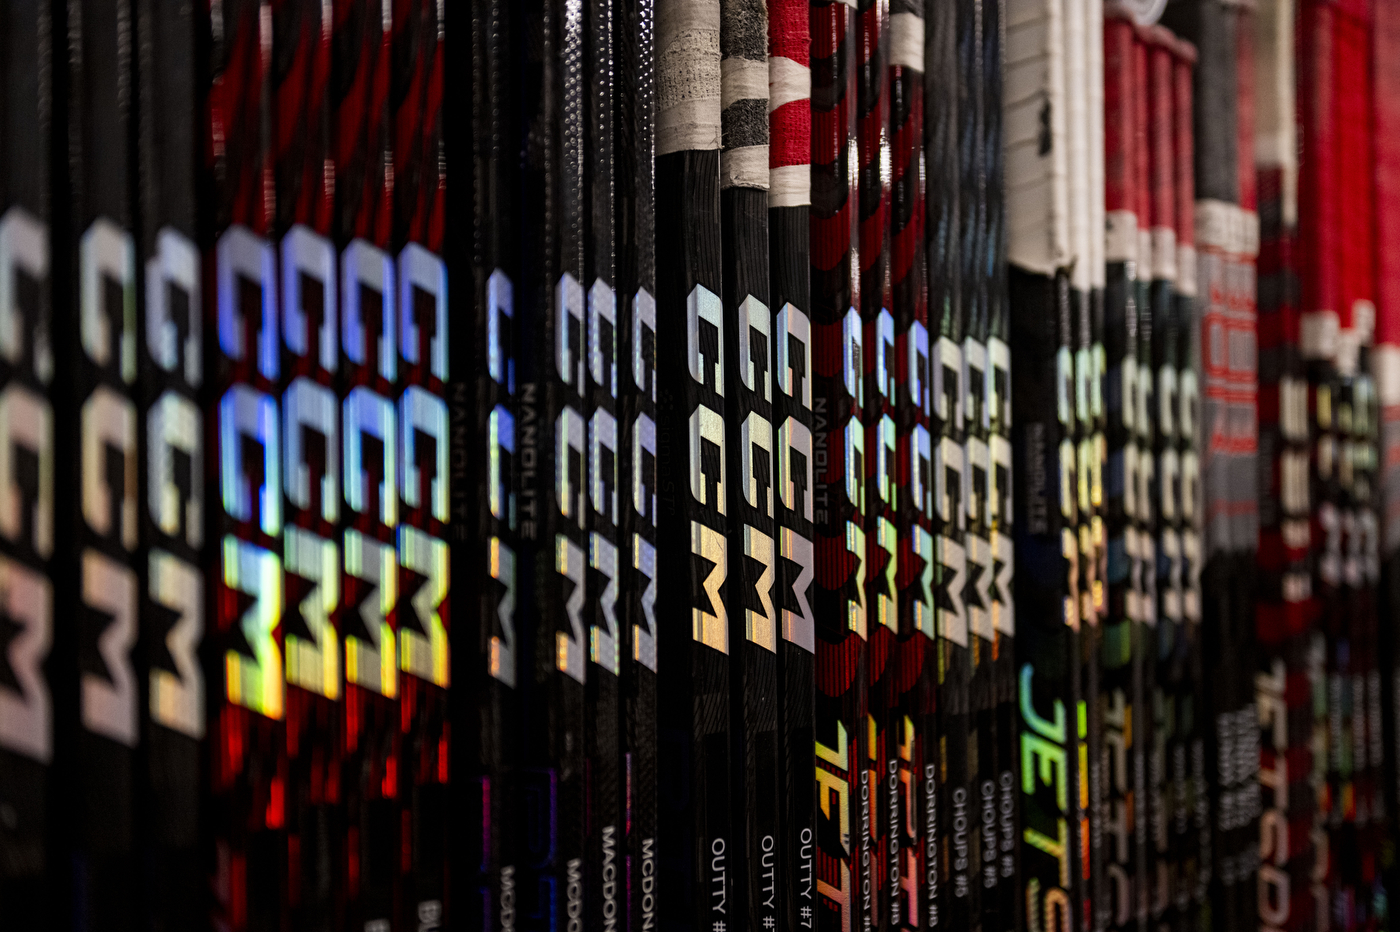 hockey sticks lined up against the wall